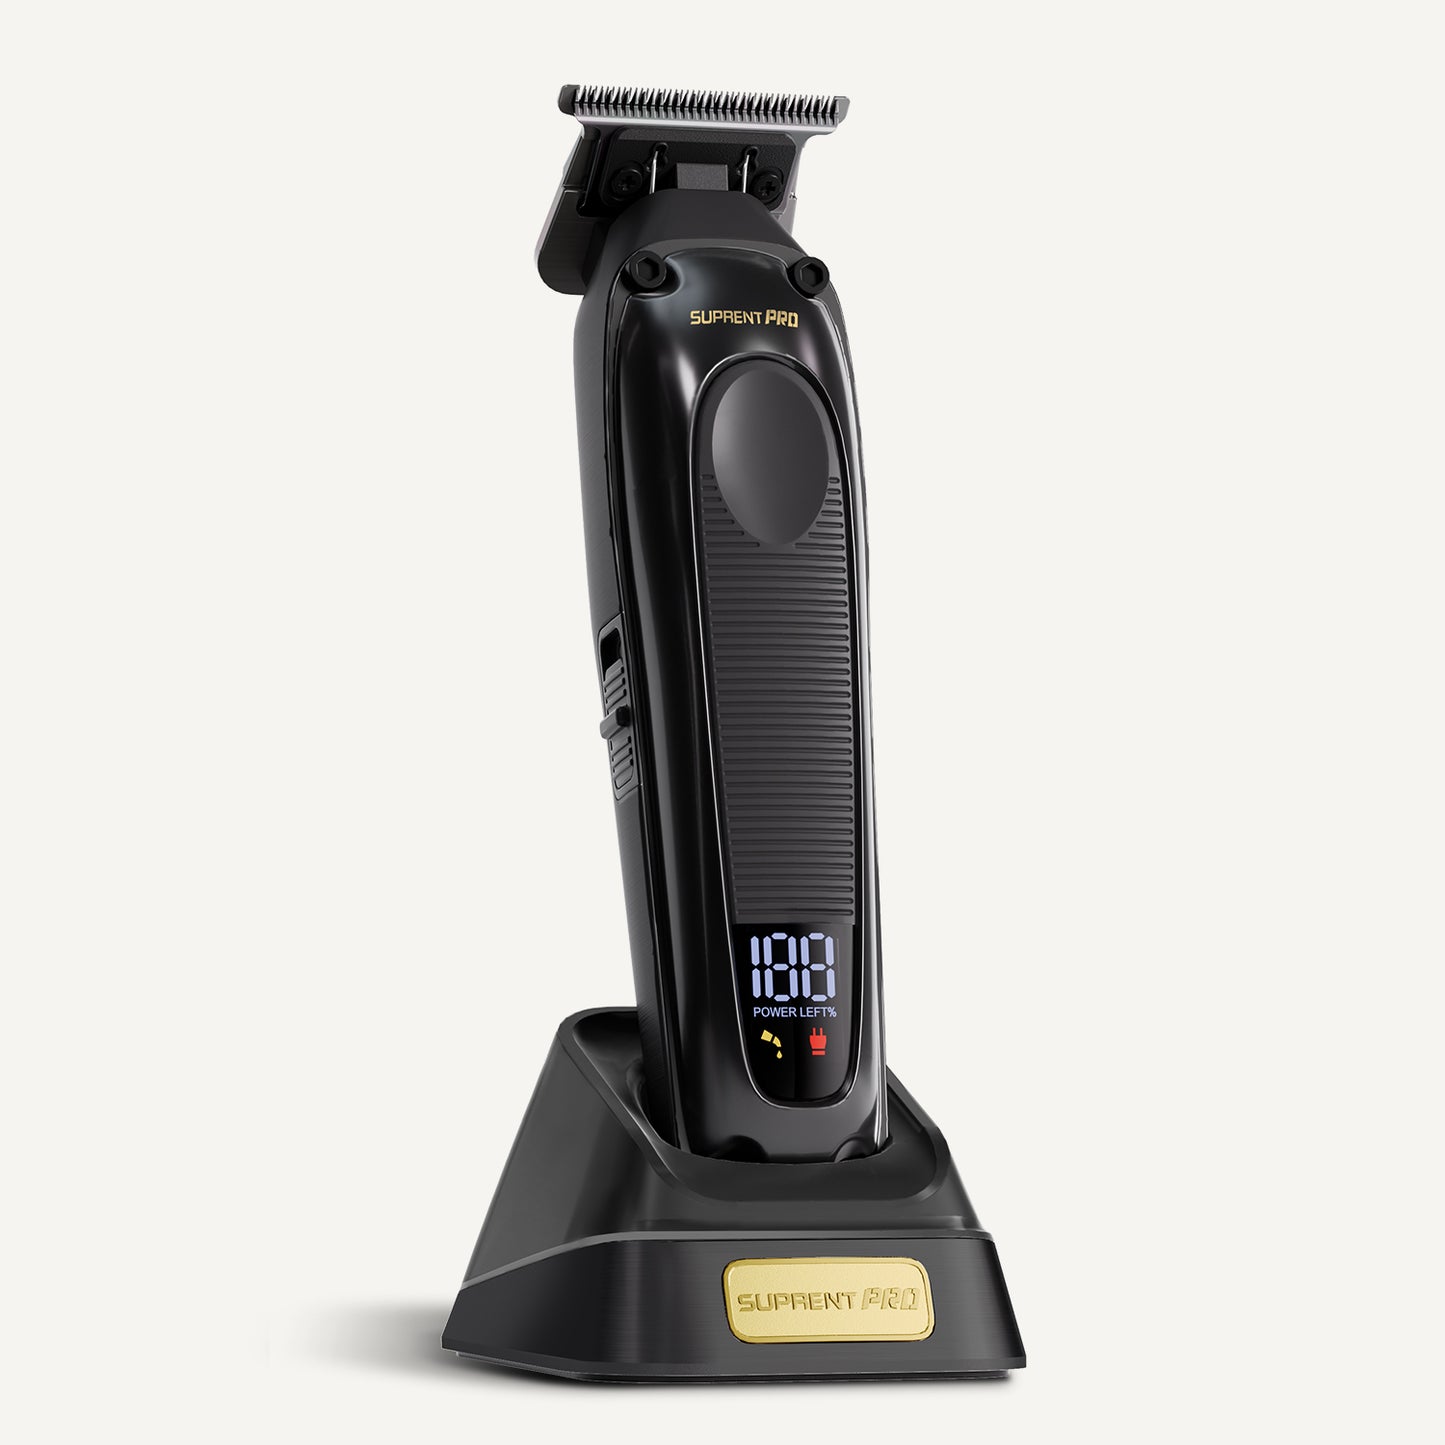 The Black Obsidian-T Professional Trimmer - FT775BX